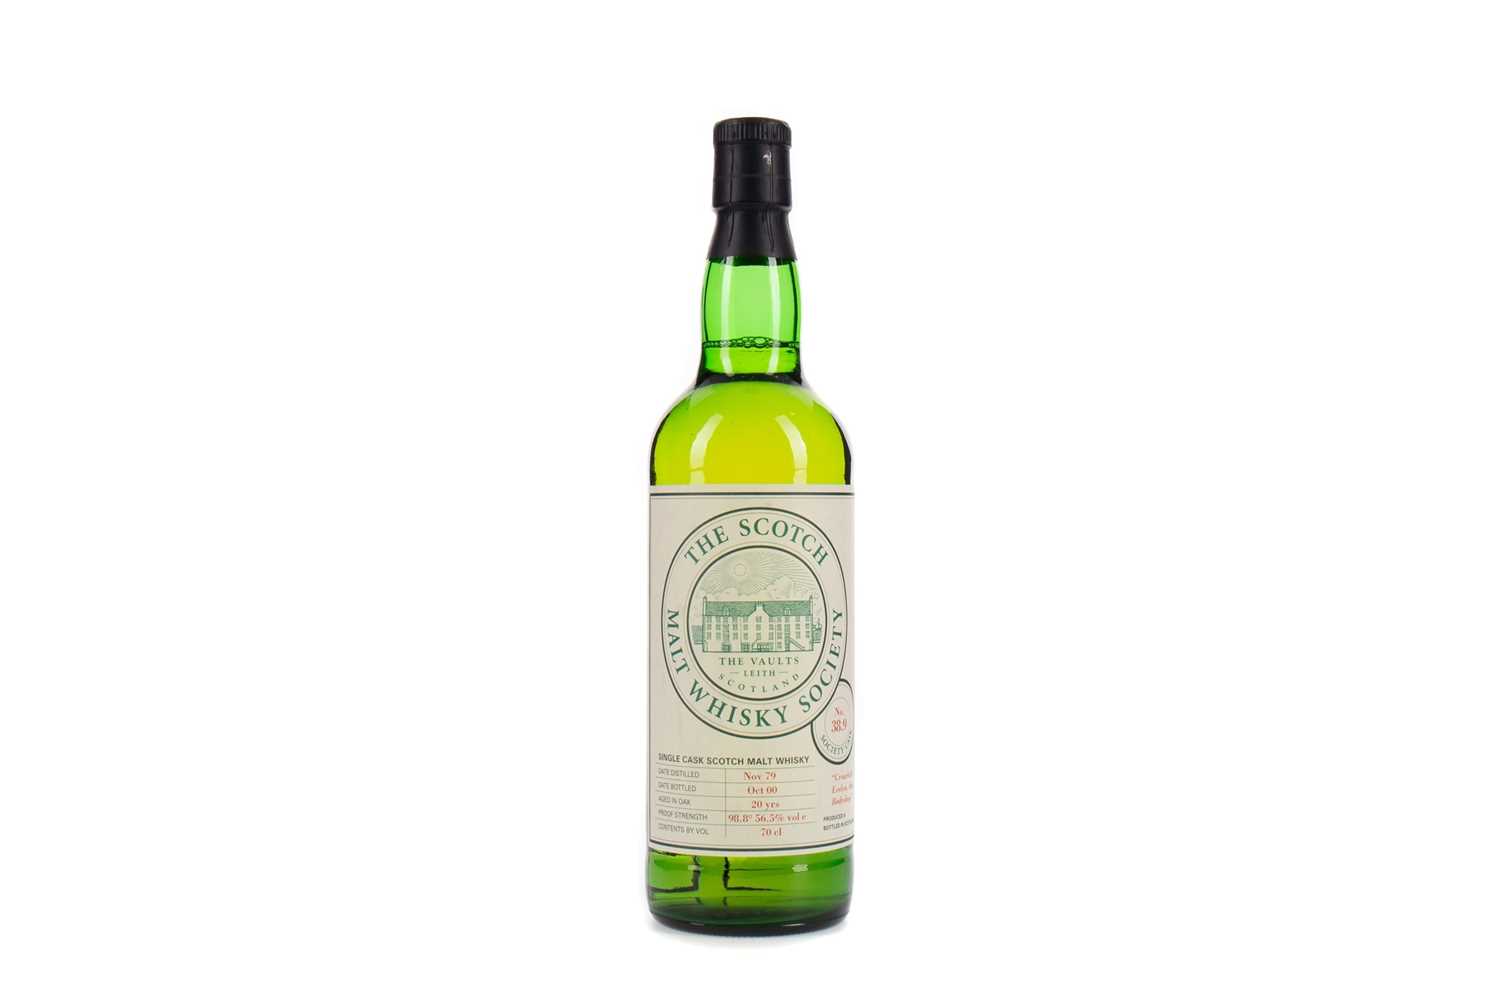 Lot 247 - CAPERDONICH 1979 SMWS 38.9 AGED 20 YEARS